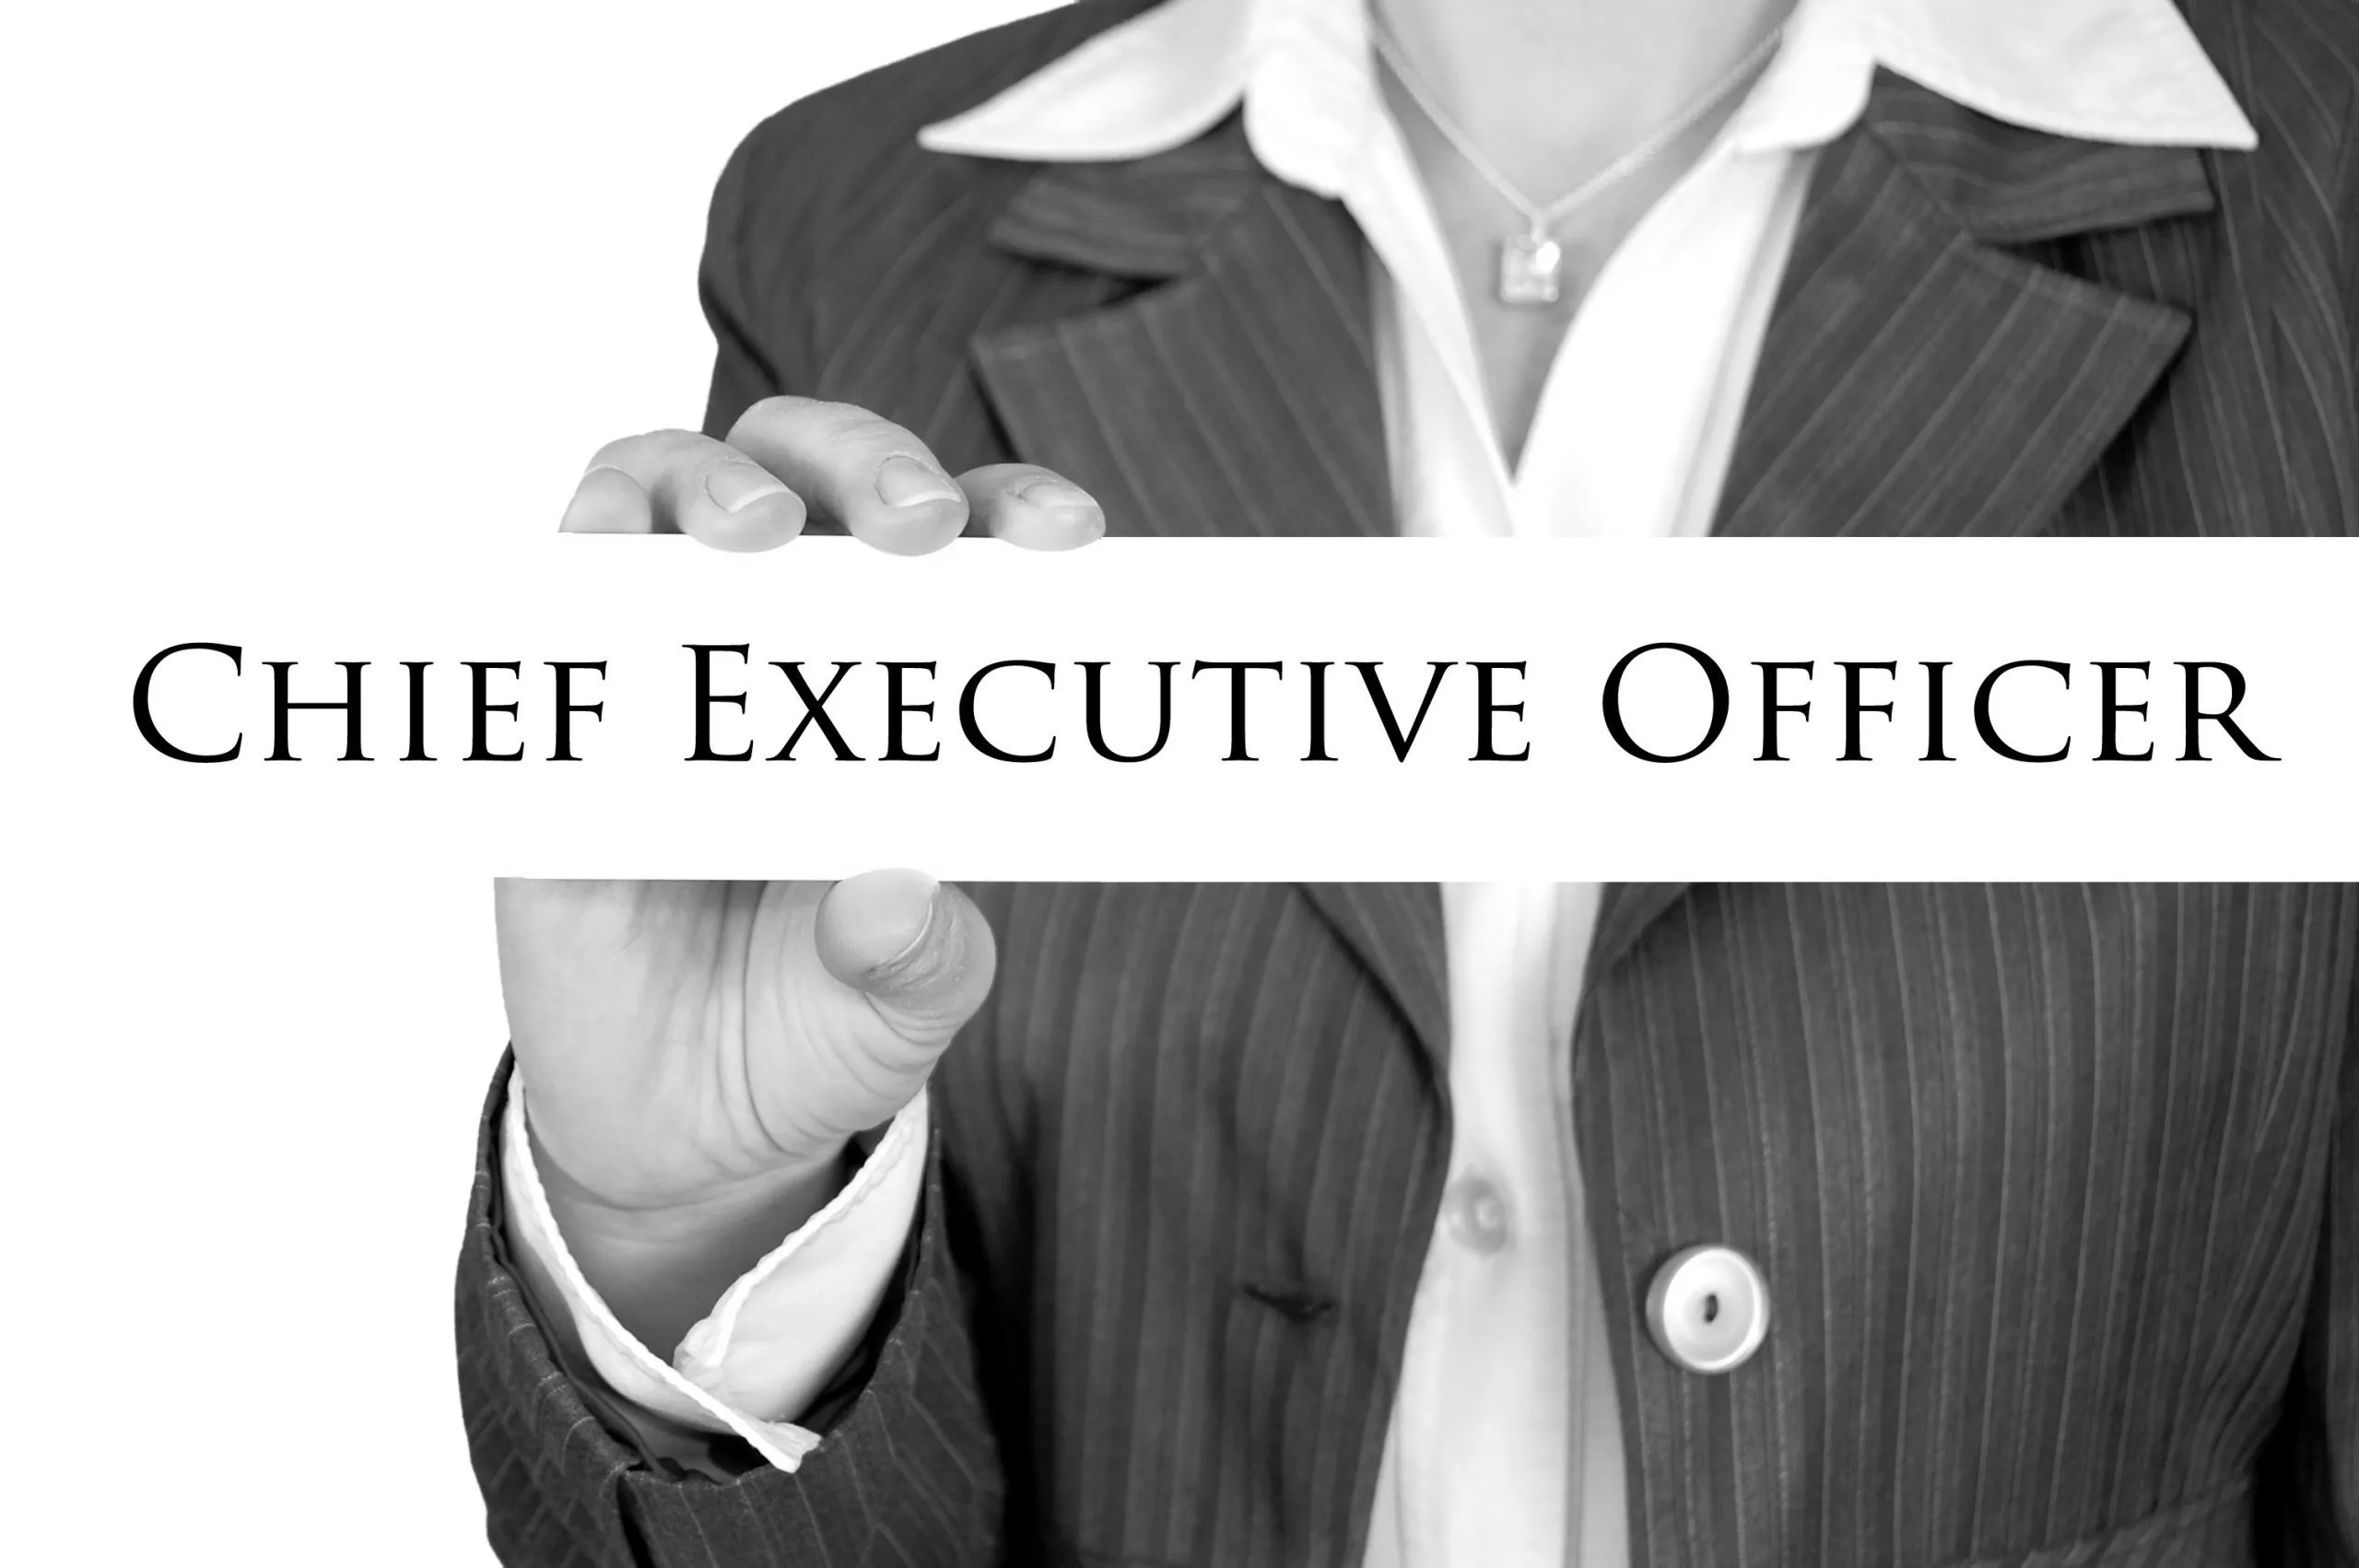 CEO-CHIEF EXECUTIVE OFFICER